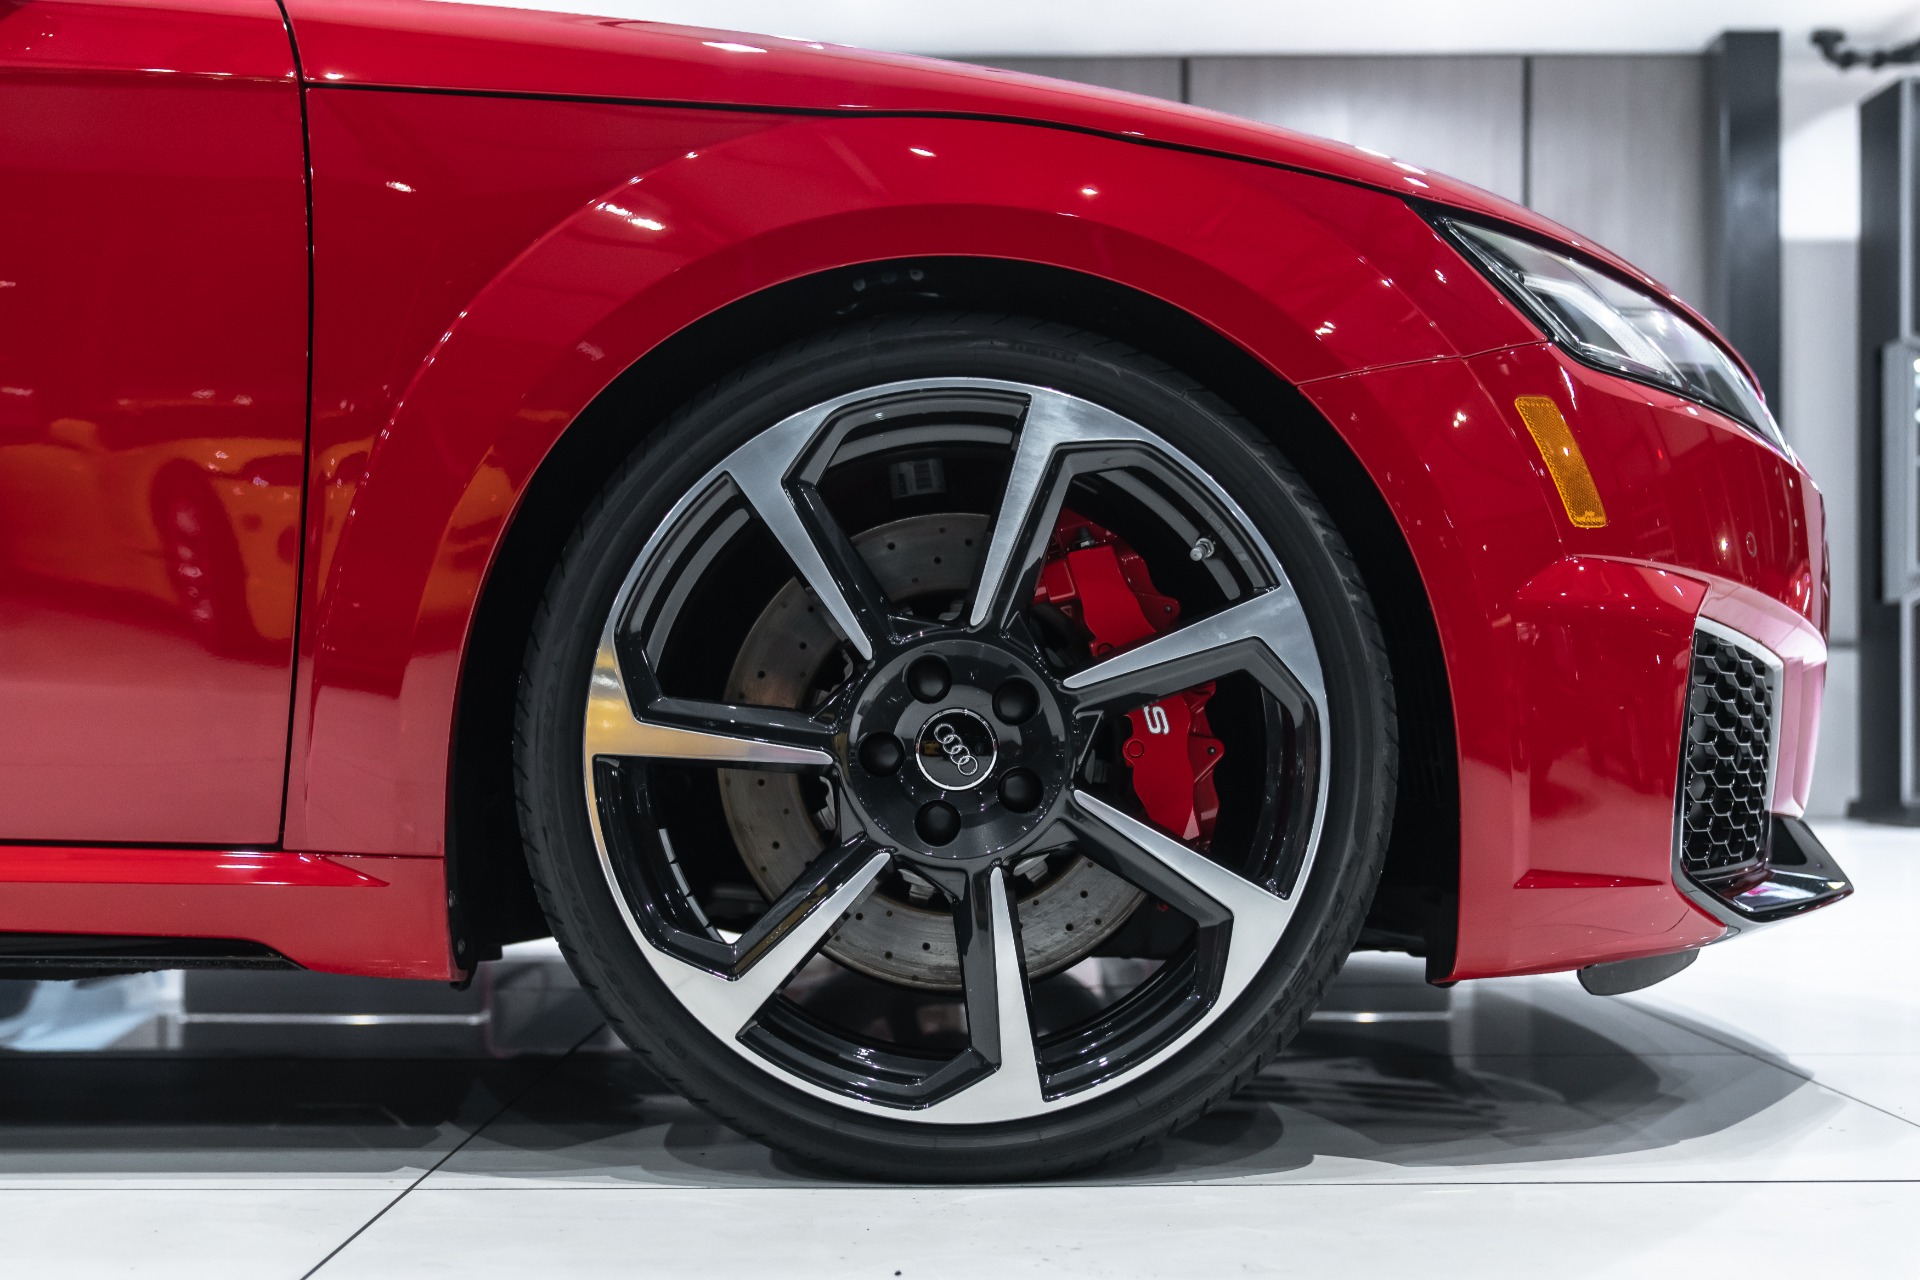 Used-2019-Audi-TT-RS-25T-Quattro-LOADED-Technology---Dynamic---Black-Optic---RS-Design-Package